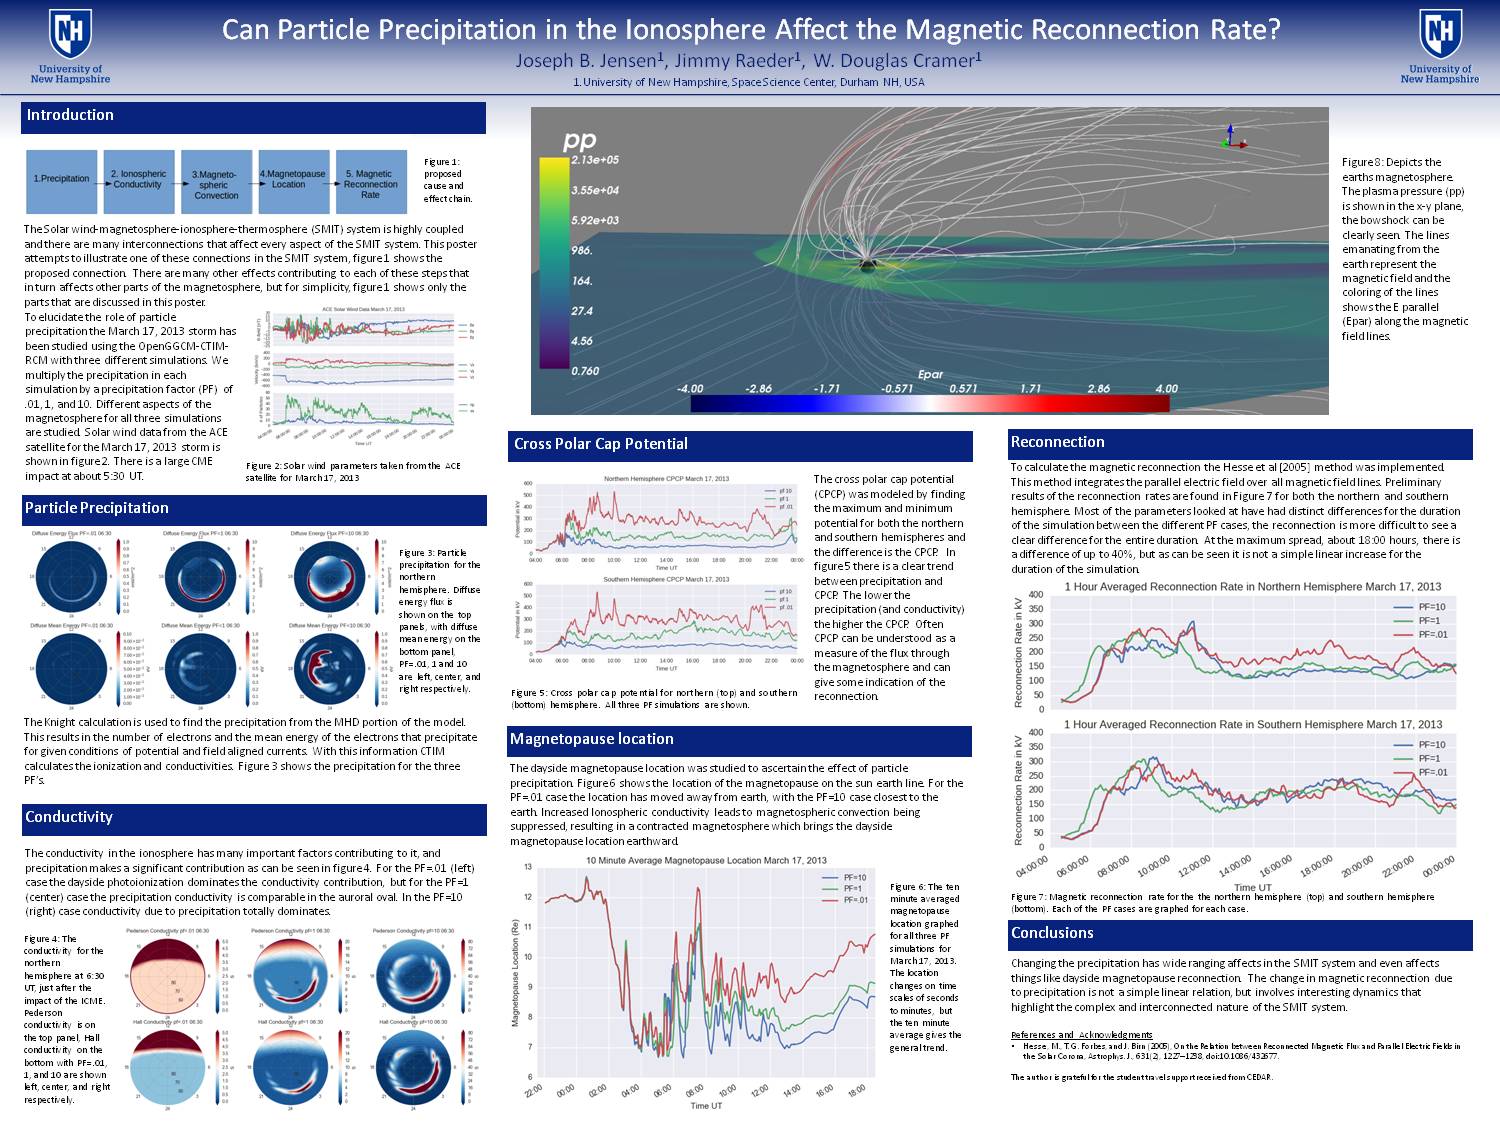 Can Particle Precipitation In The Ionosphere Affect The Magnetic Reconnection Rate? by jobejen